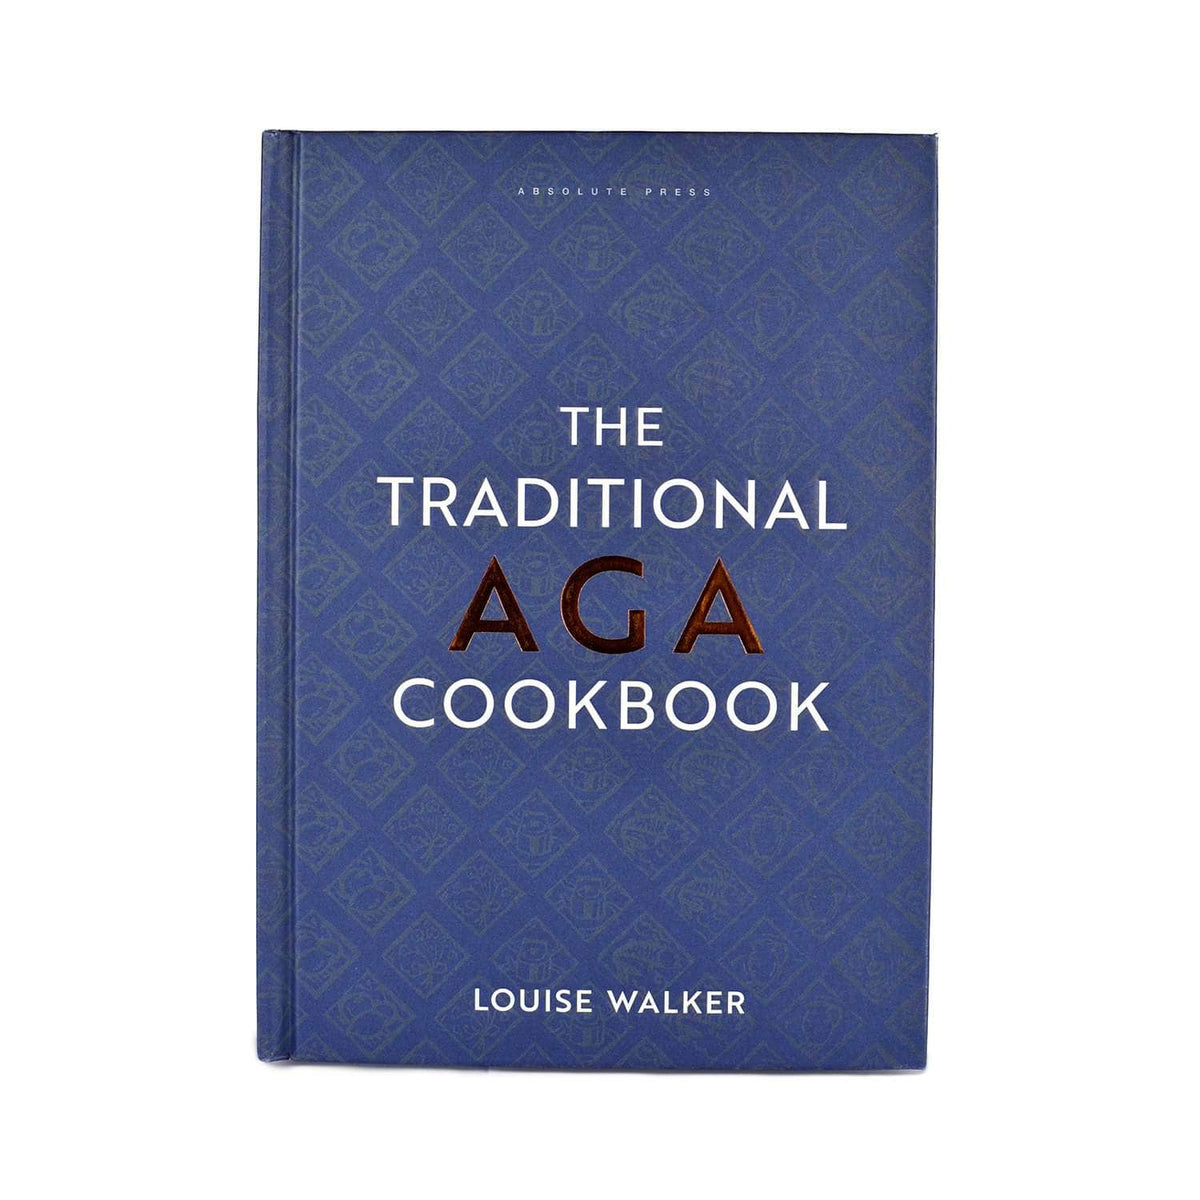 The Traditional AGA Cookbook by Louise Walker